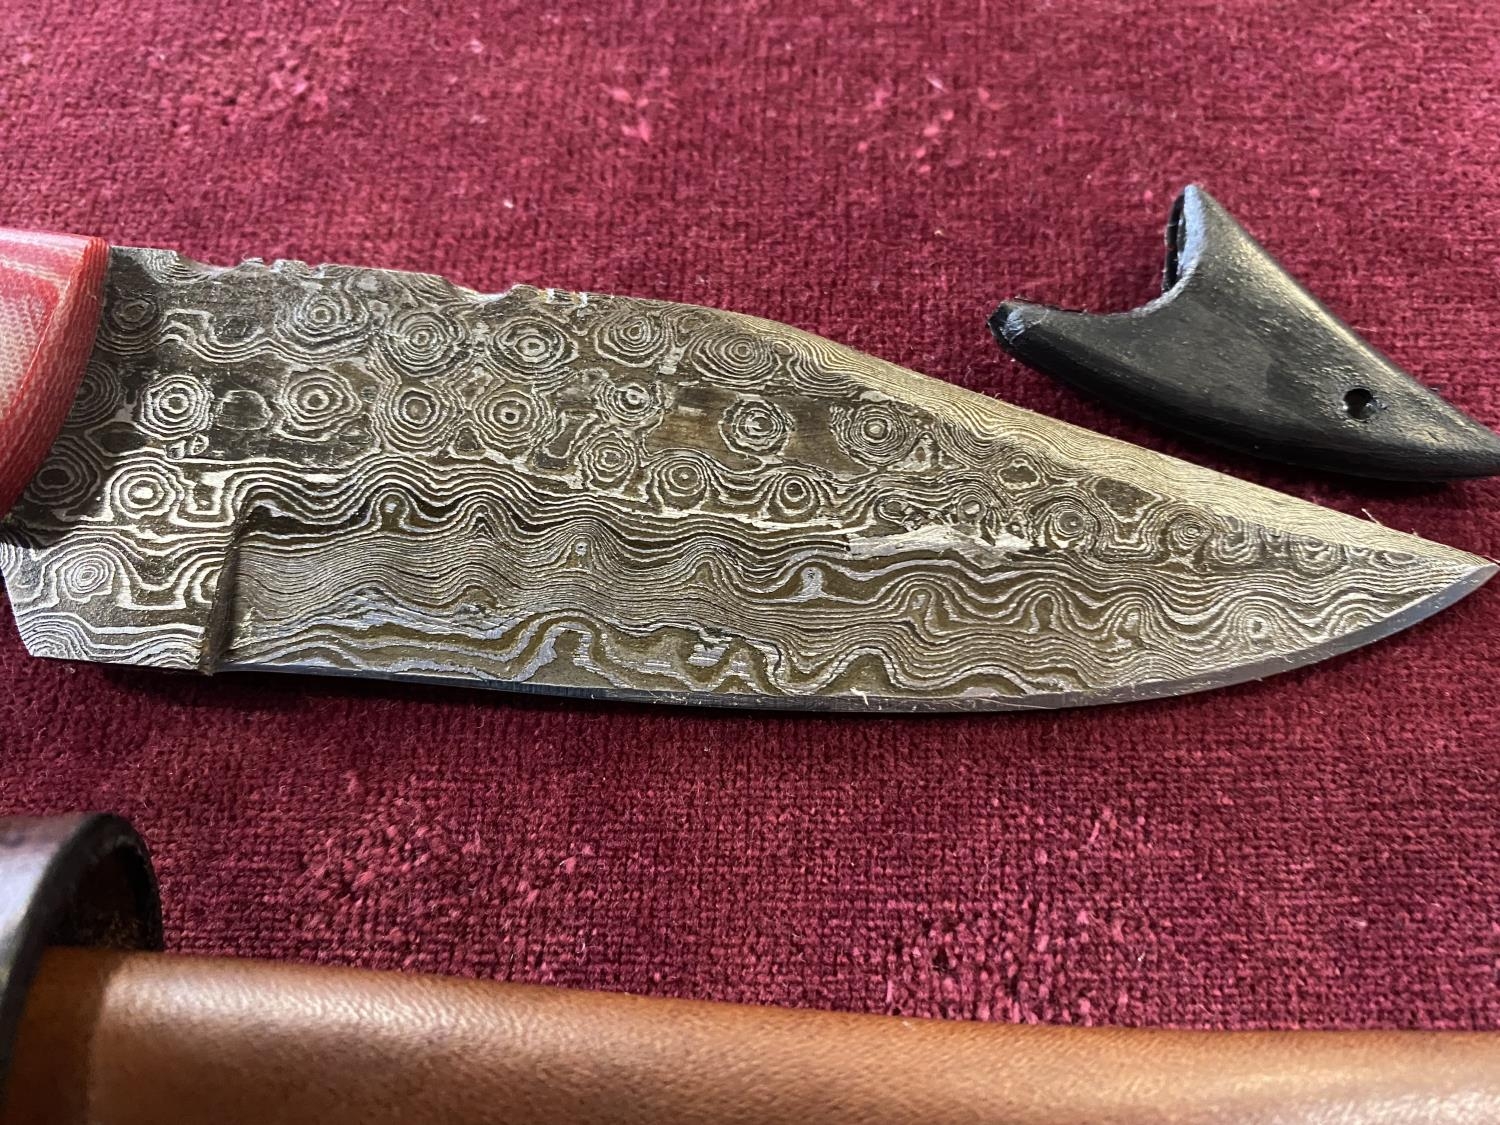 A hand forged Damascus steel bladed knife in leather sheath, over 18's only, UK post only - Image 2 of 3